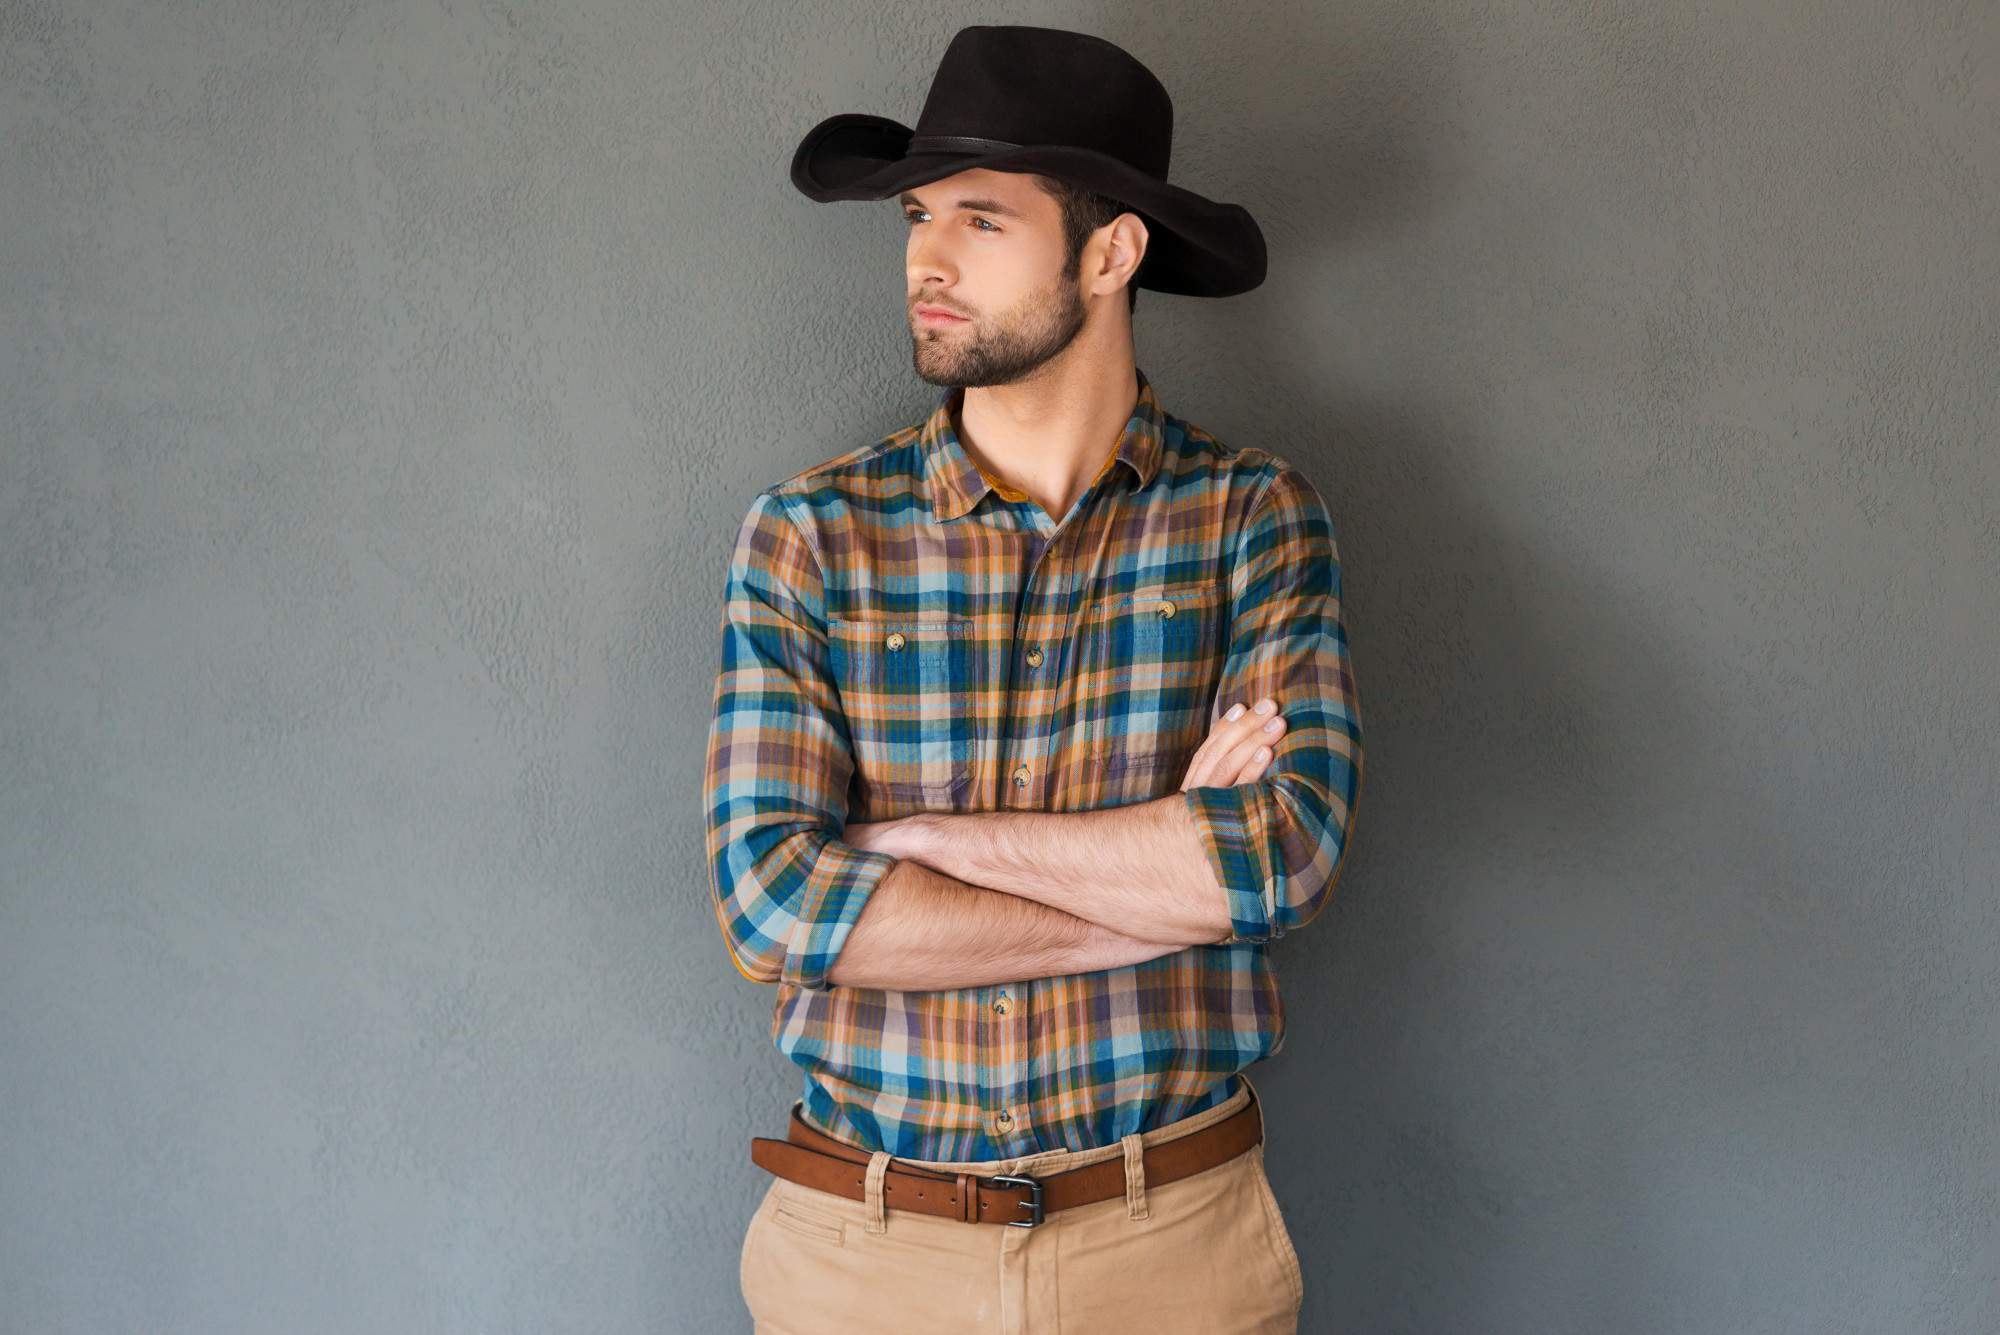 How to Dress Country: 5 Tips for Men